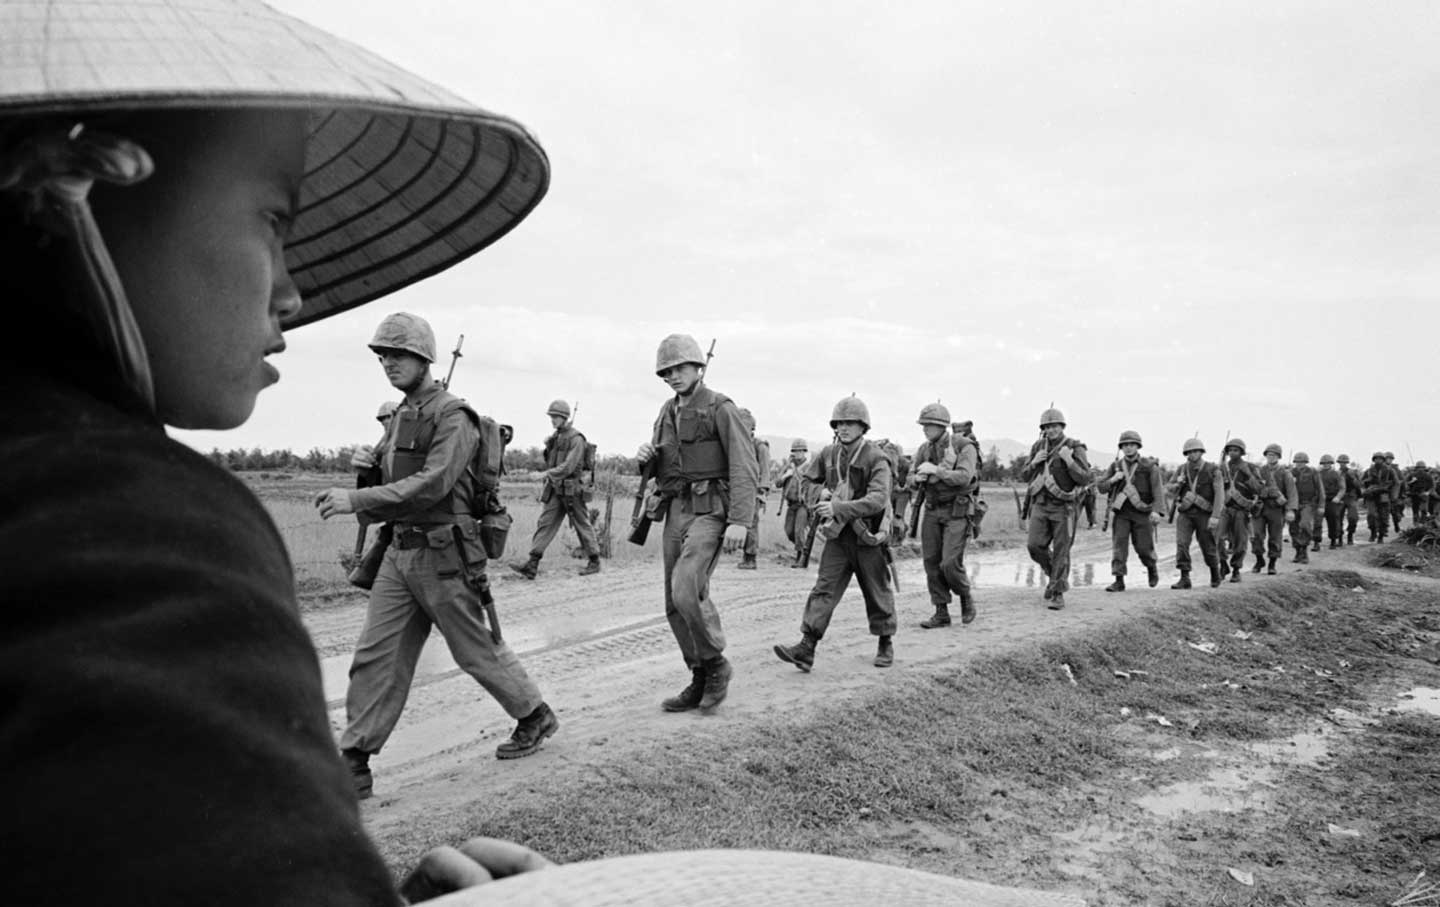 Vietnam War : The Face of the Enemy (Vietnamese Perspective)